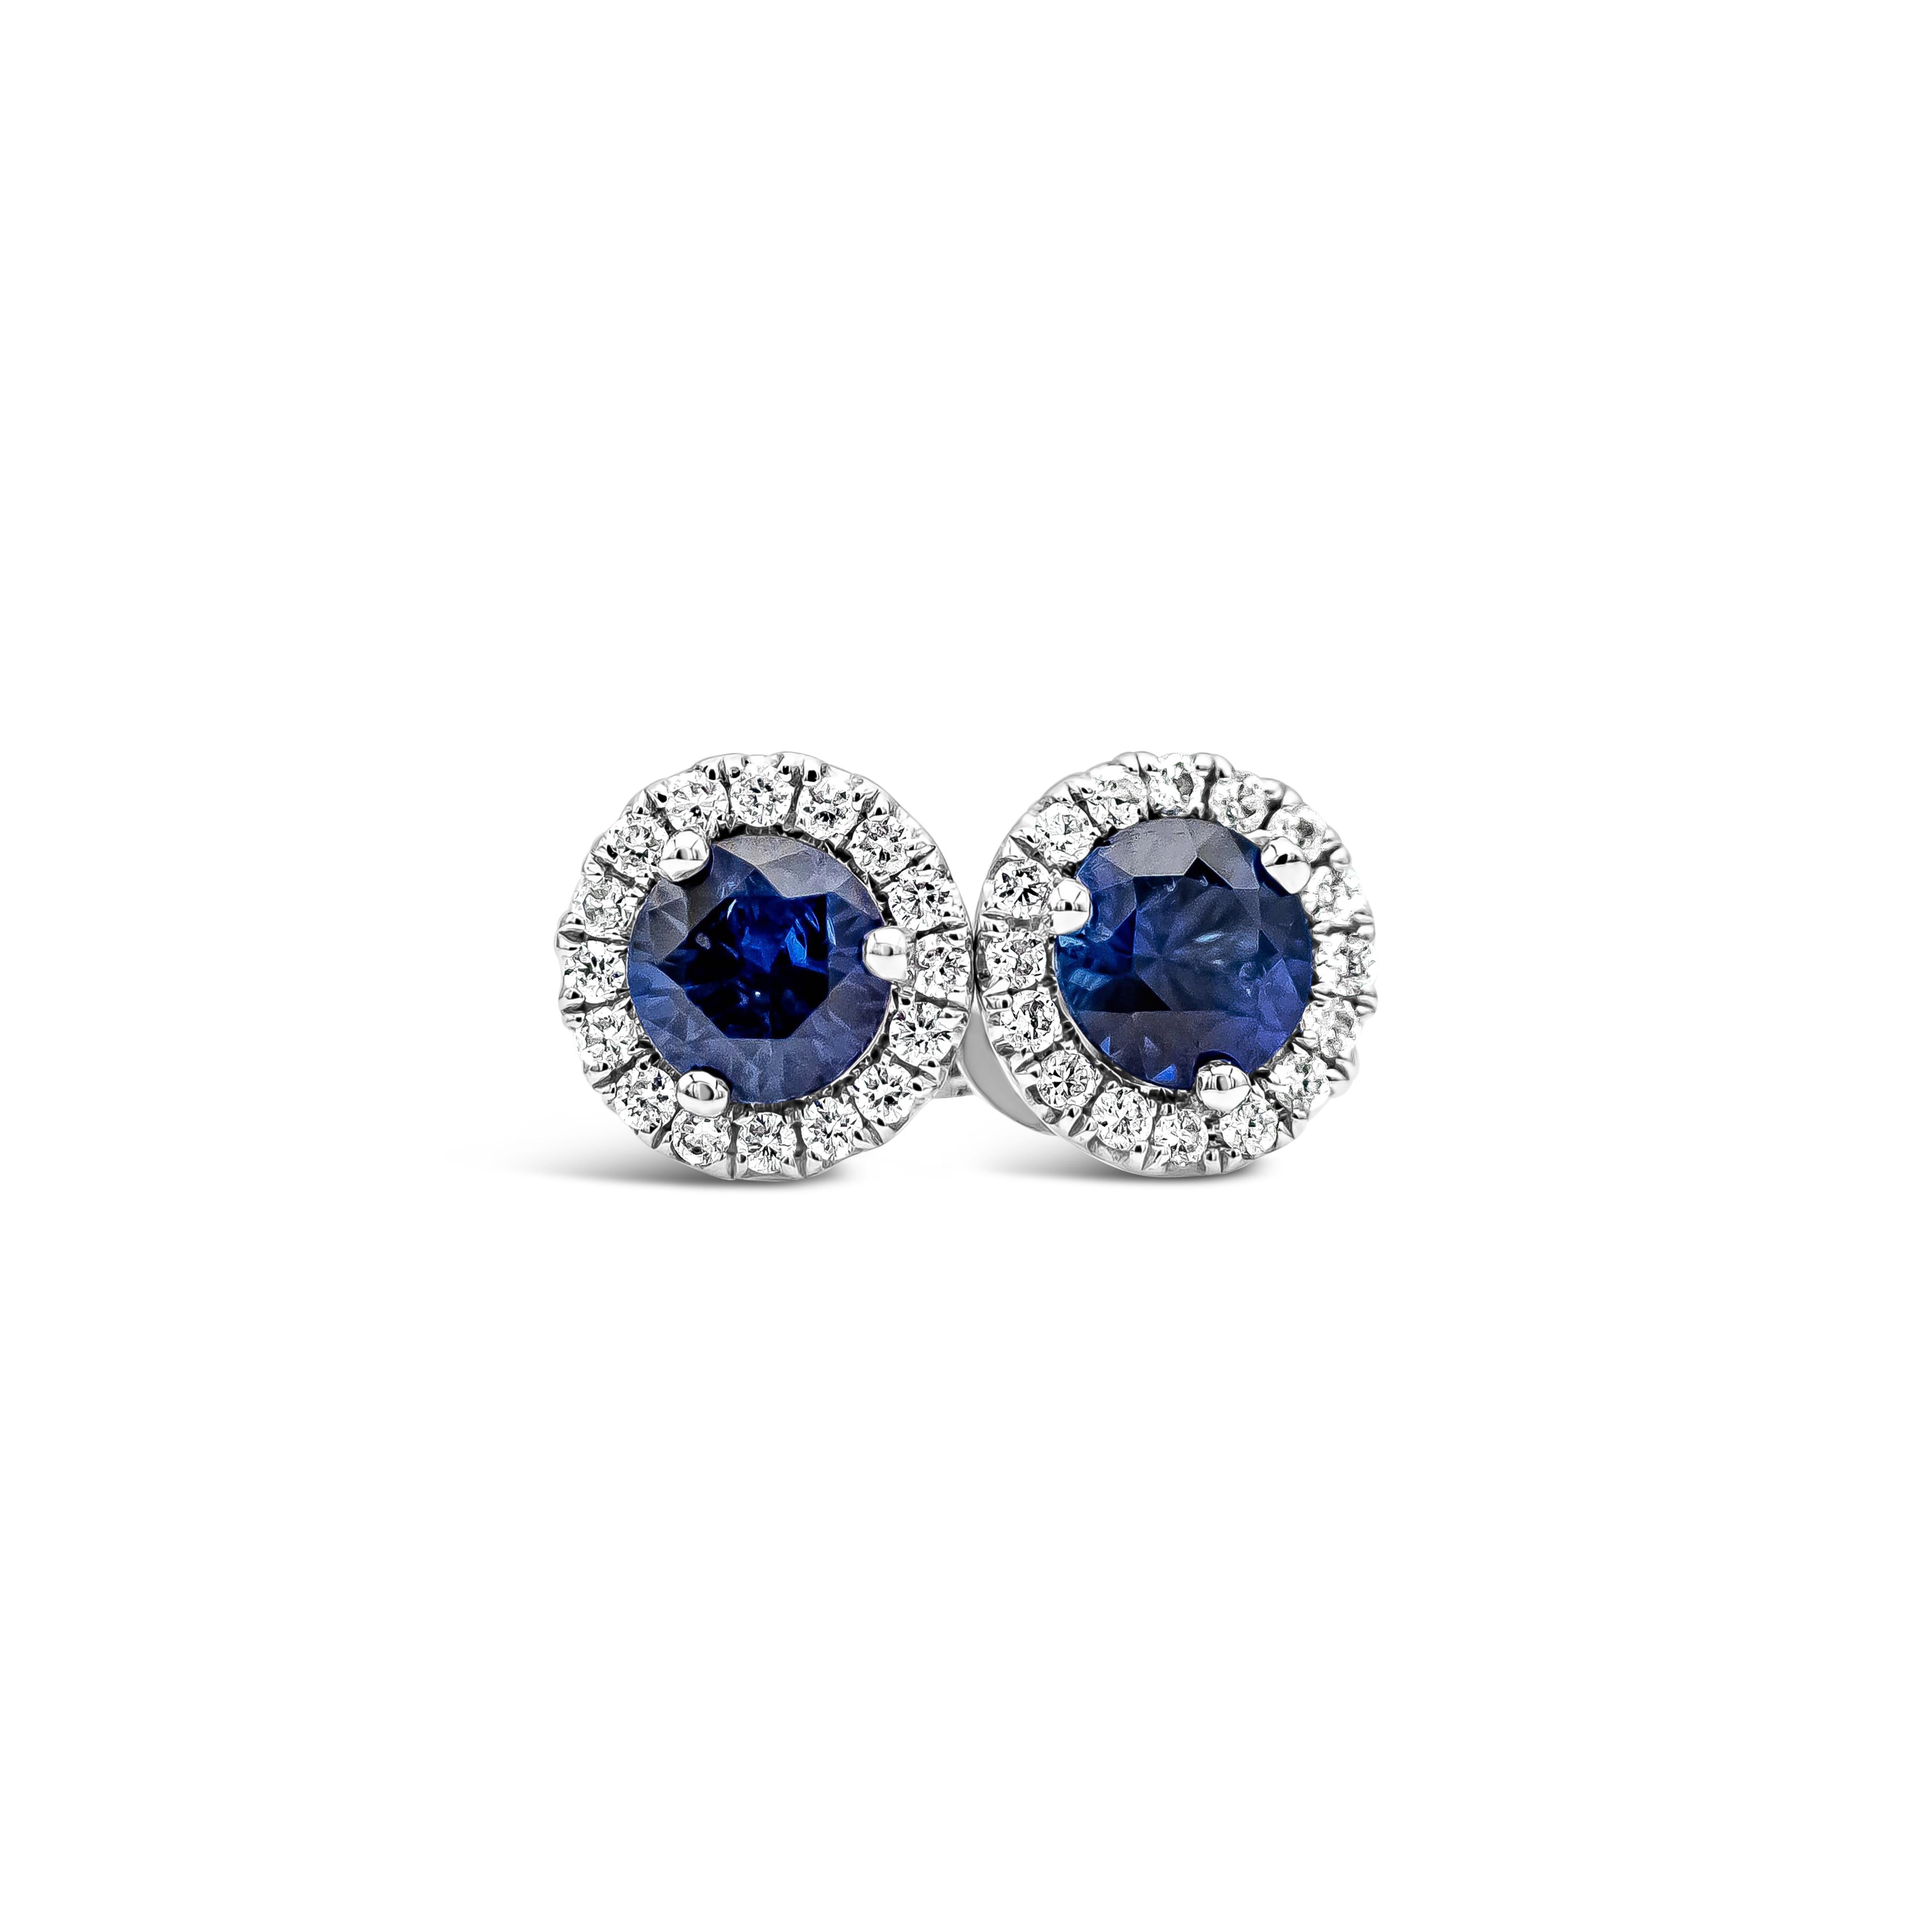 A simple and classic pair of stud earrings showcasing round blue sapphires weighing 0.64 carats total, surrounded by a single row of round brilliant diamonds. Accent diamonds weigh 0.16 carats total. Set in an 18k white gold mounting.

Style